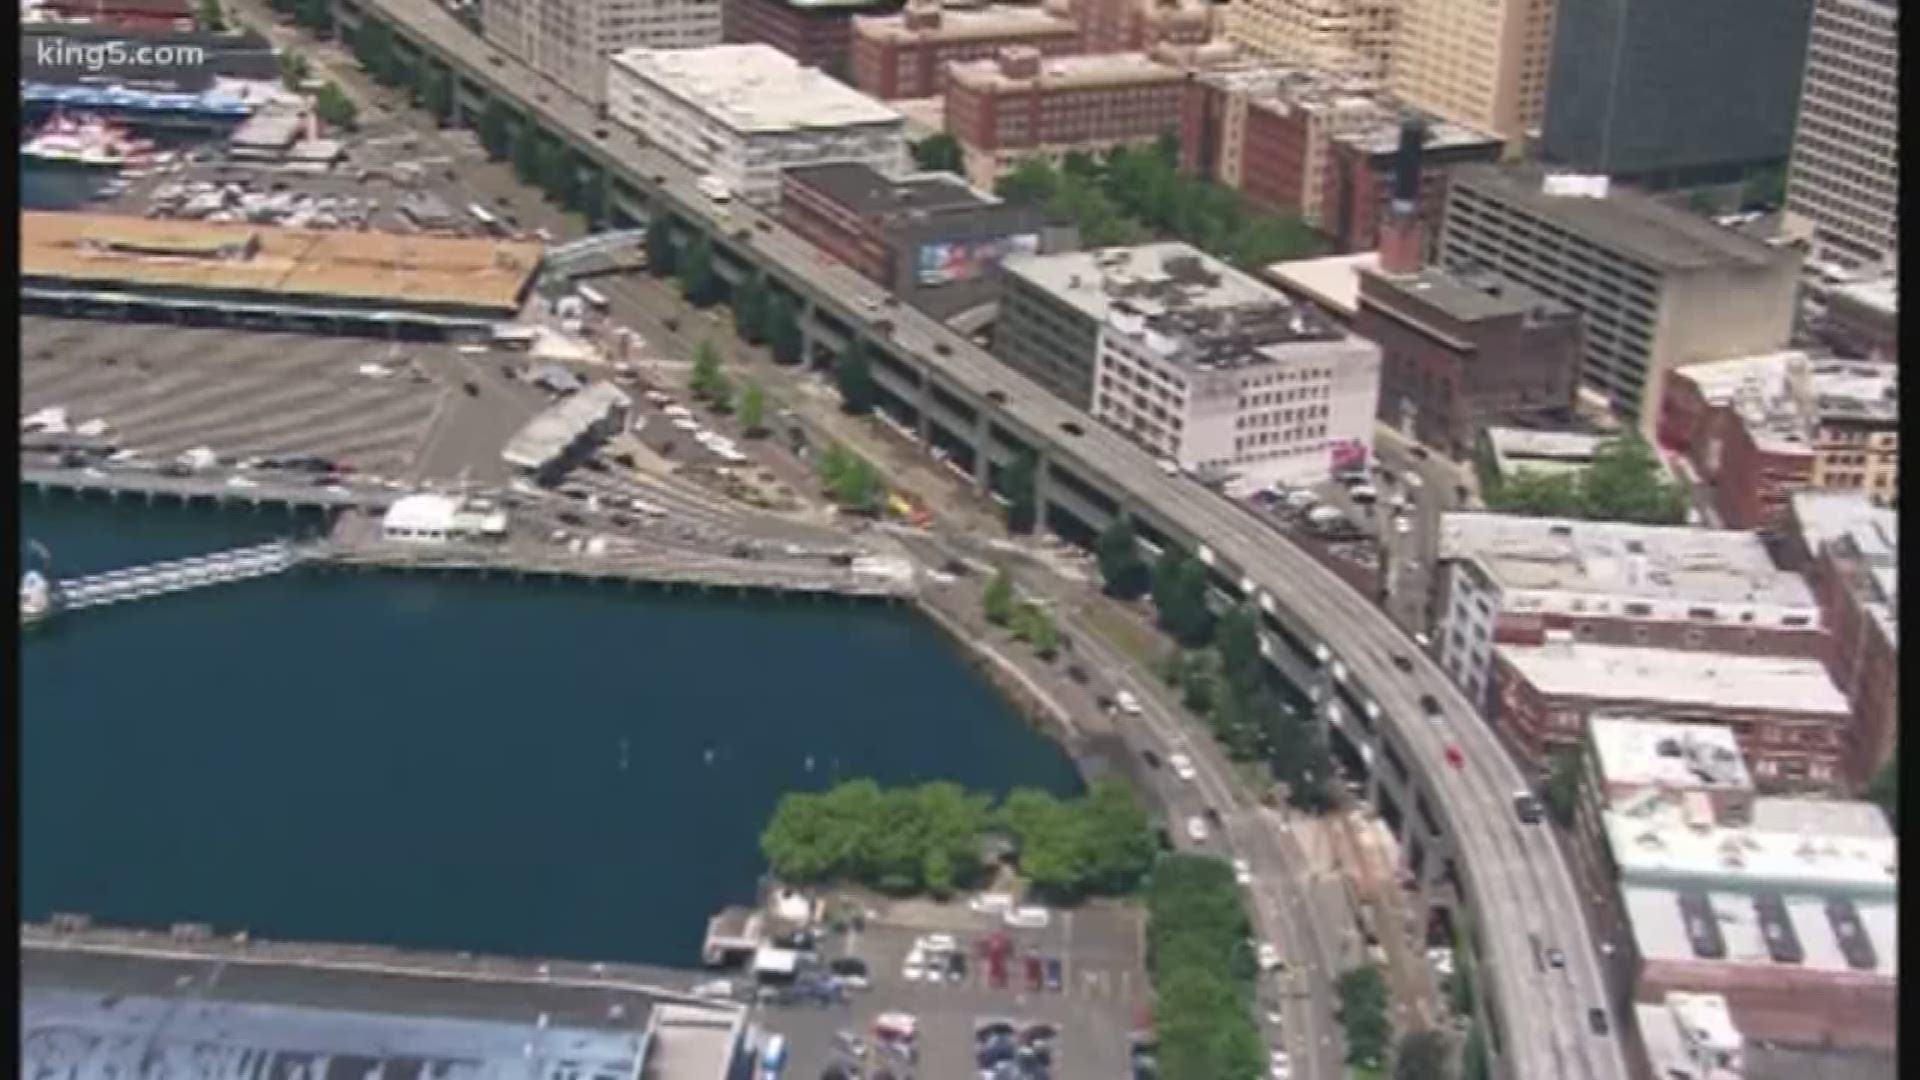 KING 5's Jake Whittenberg maps out what effect on downtown traffic the new tunnel will have.